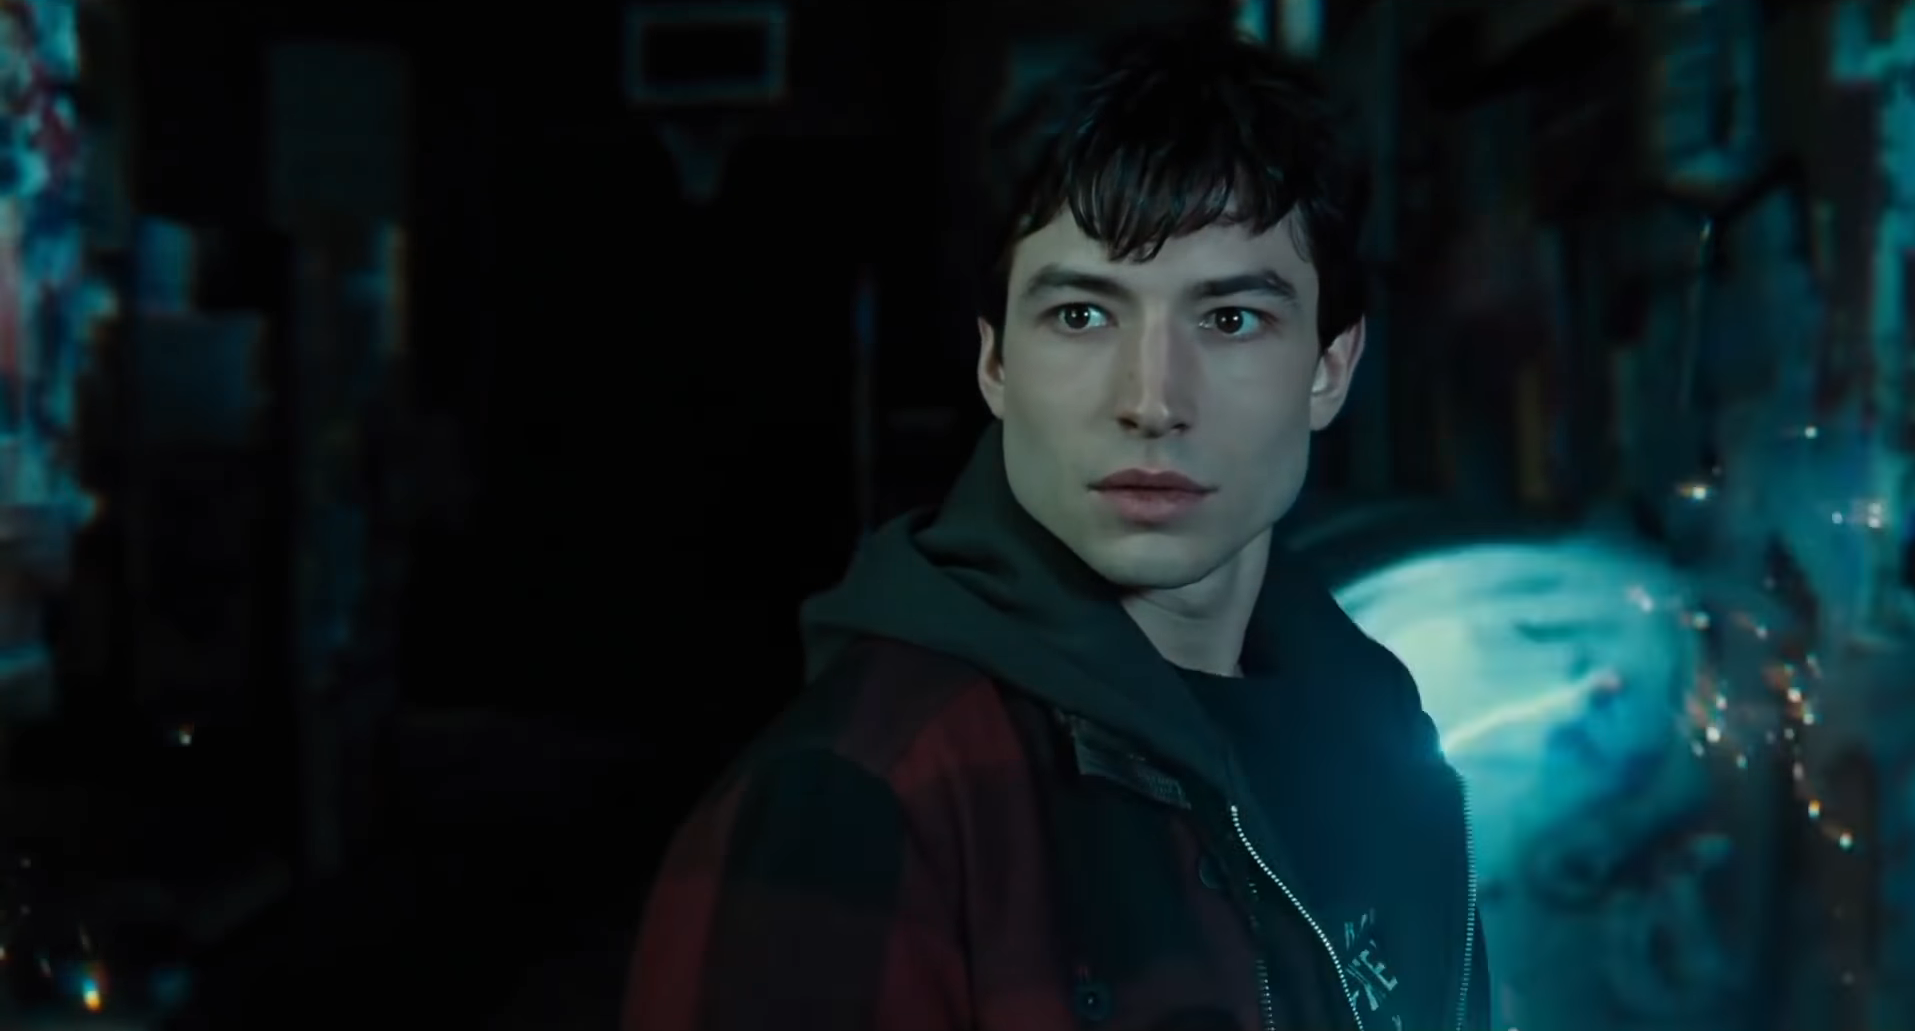 "Flash" star Ezra Miller is accused of new offenses